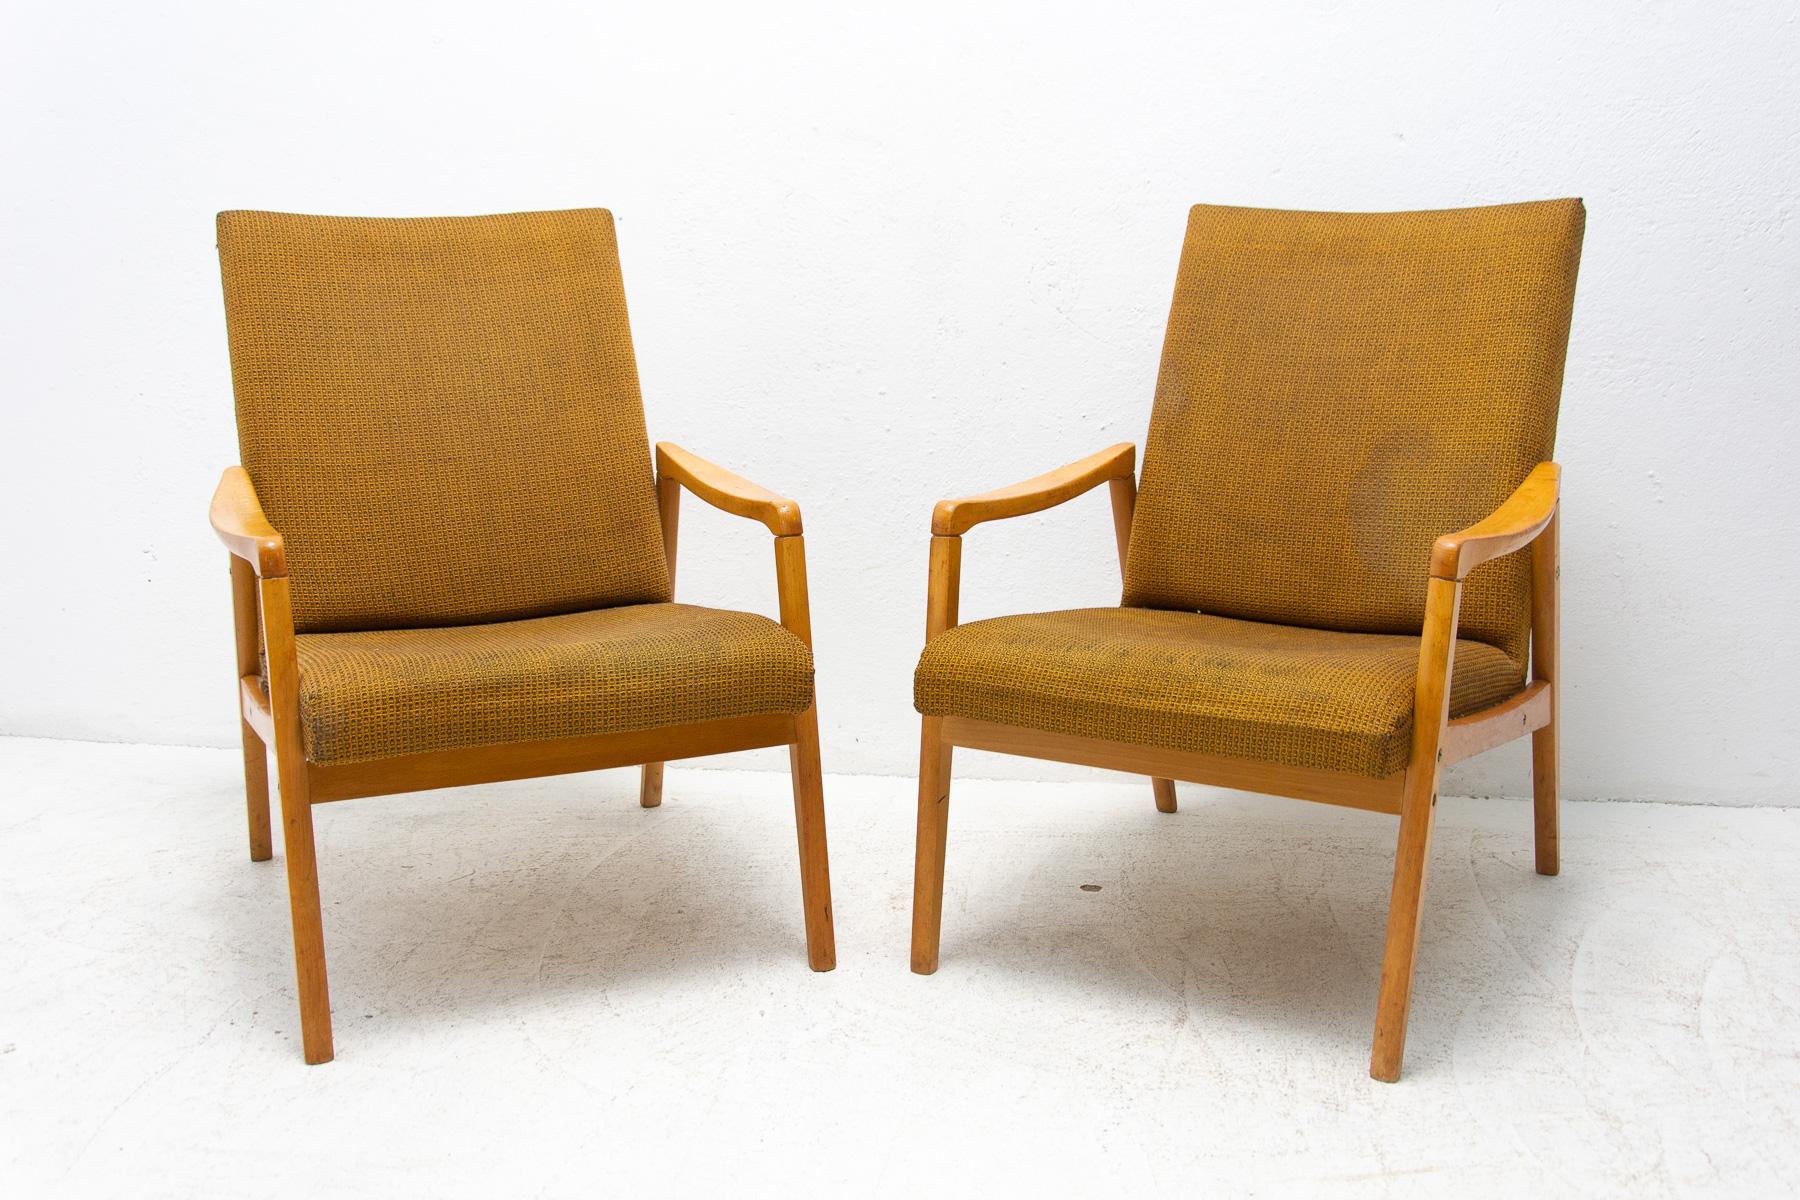 A pair of armchairs, made in the former Czechoslovakia in the 1970´s. It was designed by Jirí Jiroutek for Interiér Praha as part of U-550 living room set. The structure is made of beech wood and the chairs have original upholstery. The chairs are